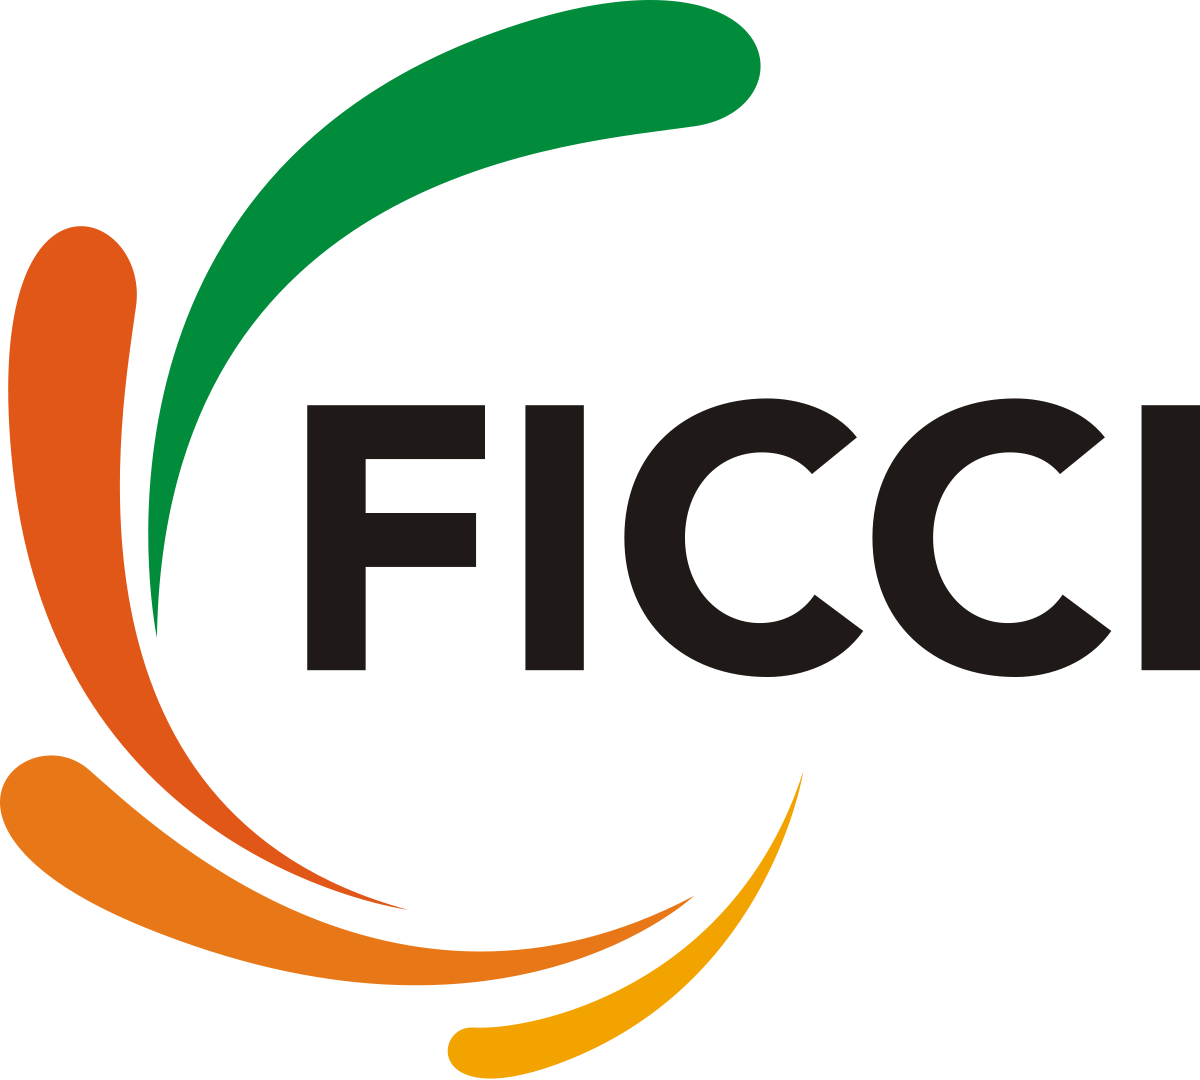 Federation Of Indian Chambers Of Commerce & Industry - Ficci India Logo (1200x1080)